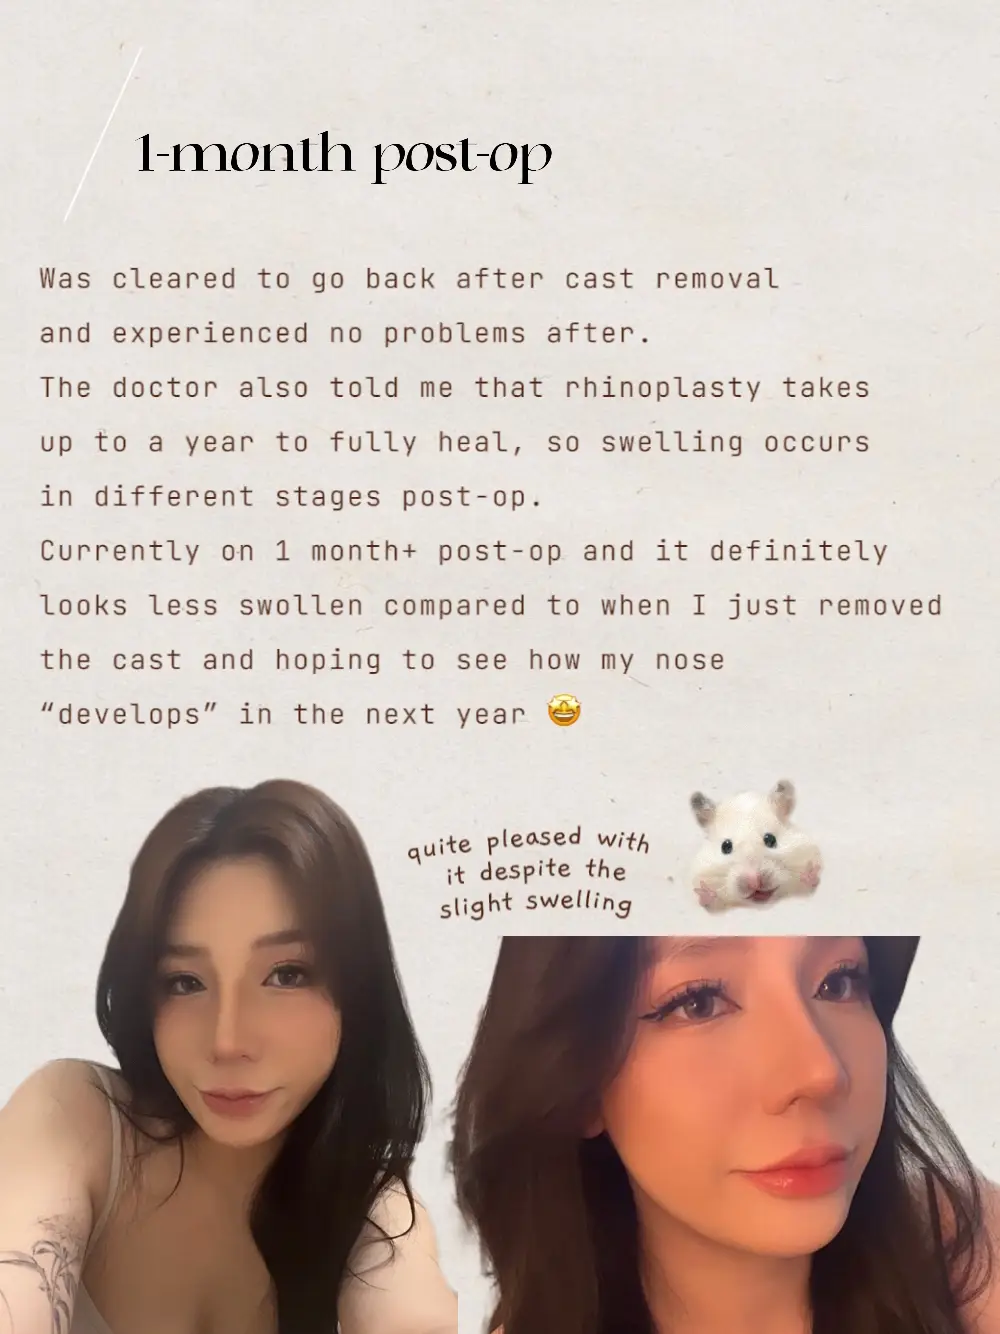 Got a nose job in Korea 🤕 (Price + Recovery!)'s images(4)